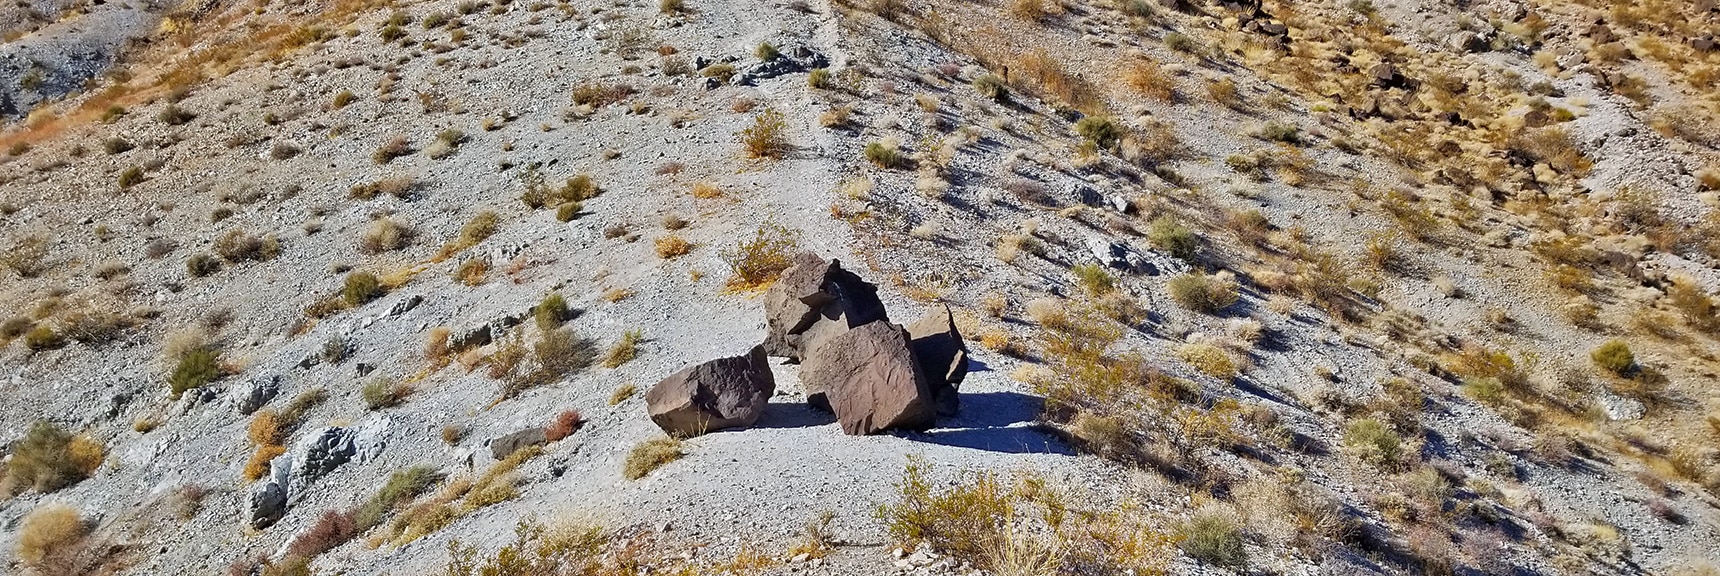 "Funny Rocks" on Fortification Hill Trail. They Fell to this Point from Above? | Fortification Hill | Lake Mead National Recreation Area, Arizona